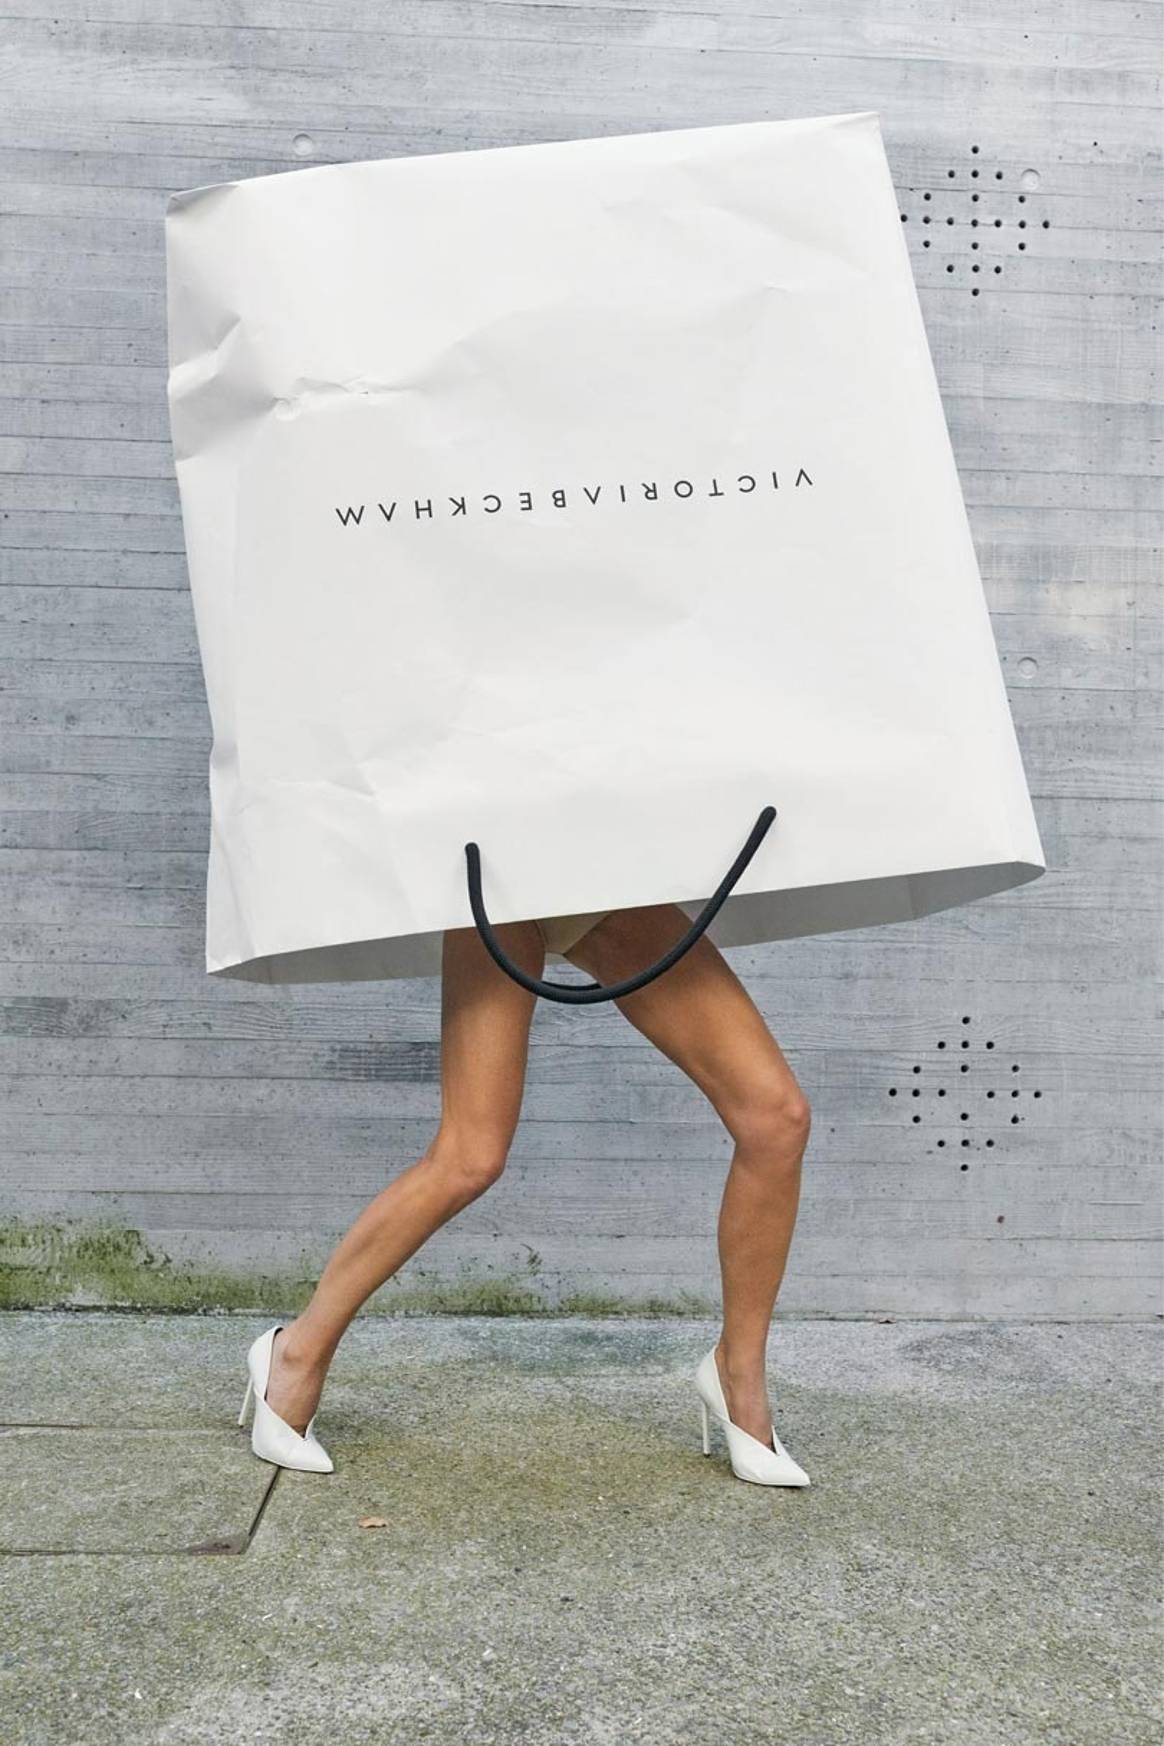 Victoria Beckham launches debut ad campaign